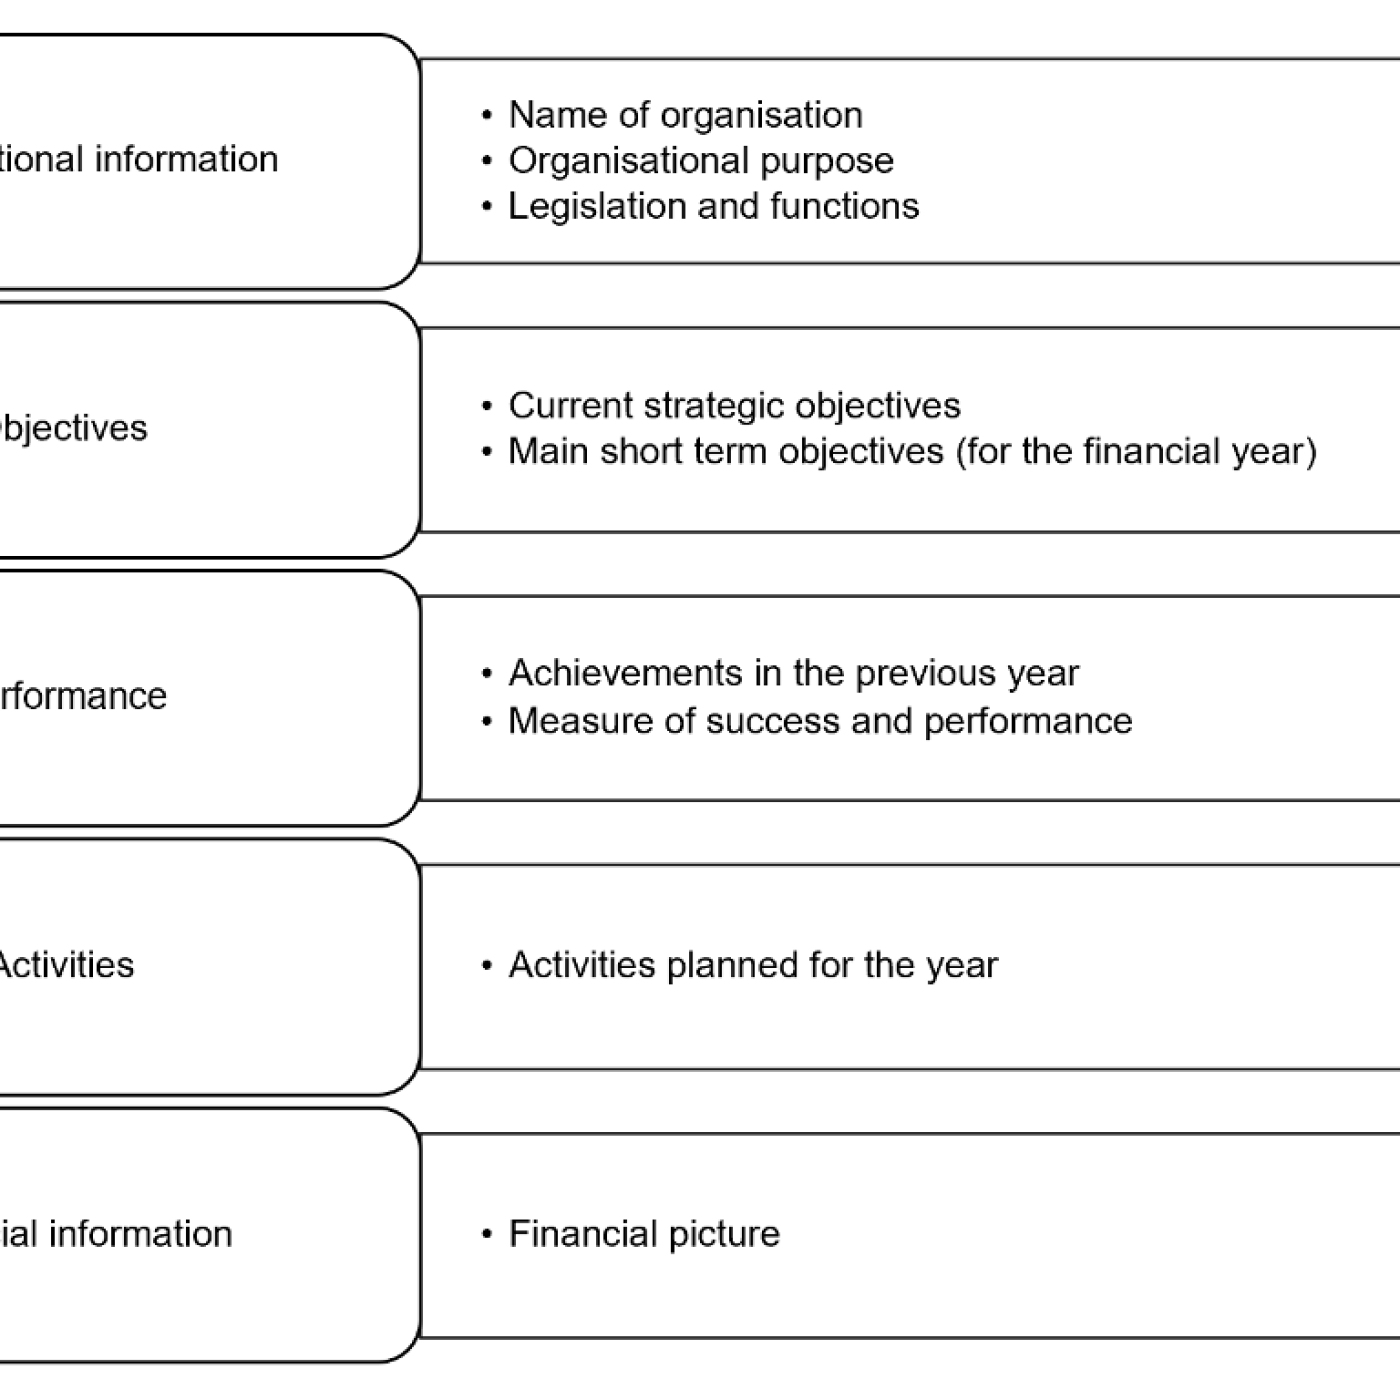 Typical contents of a corporate plan